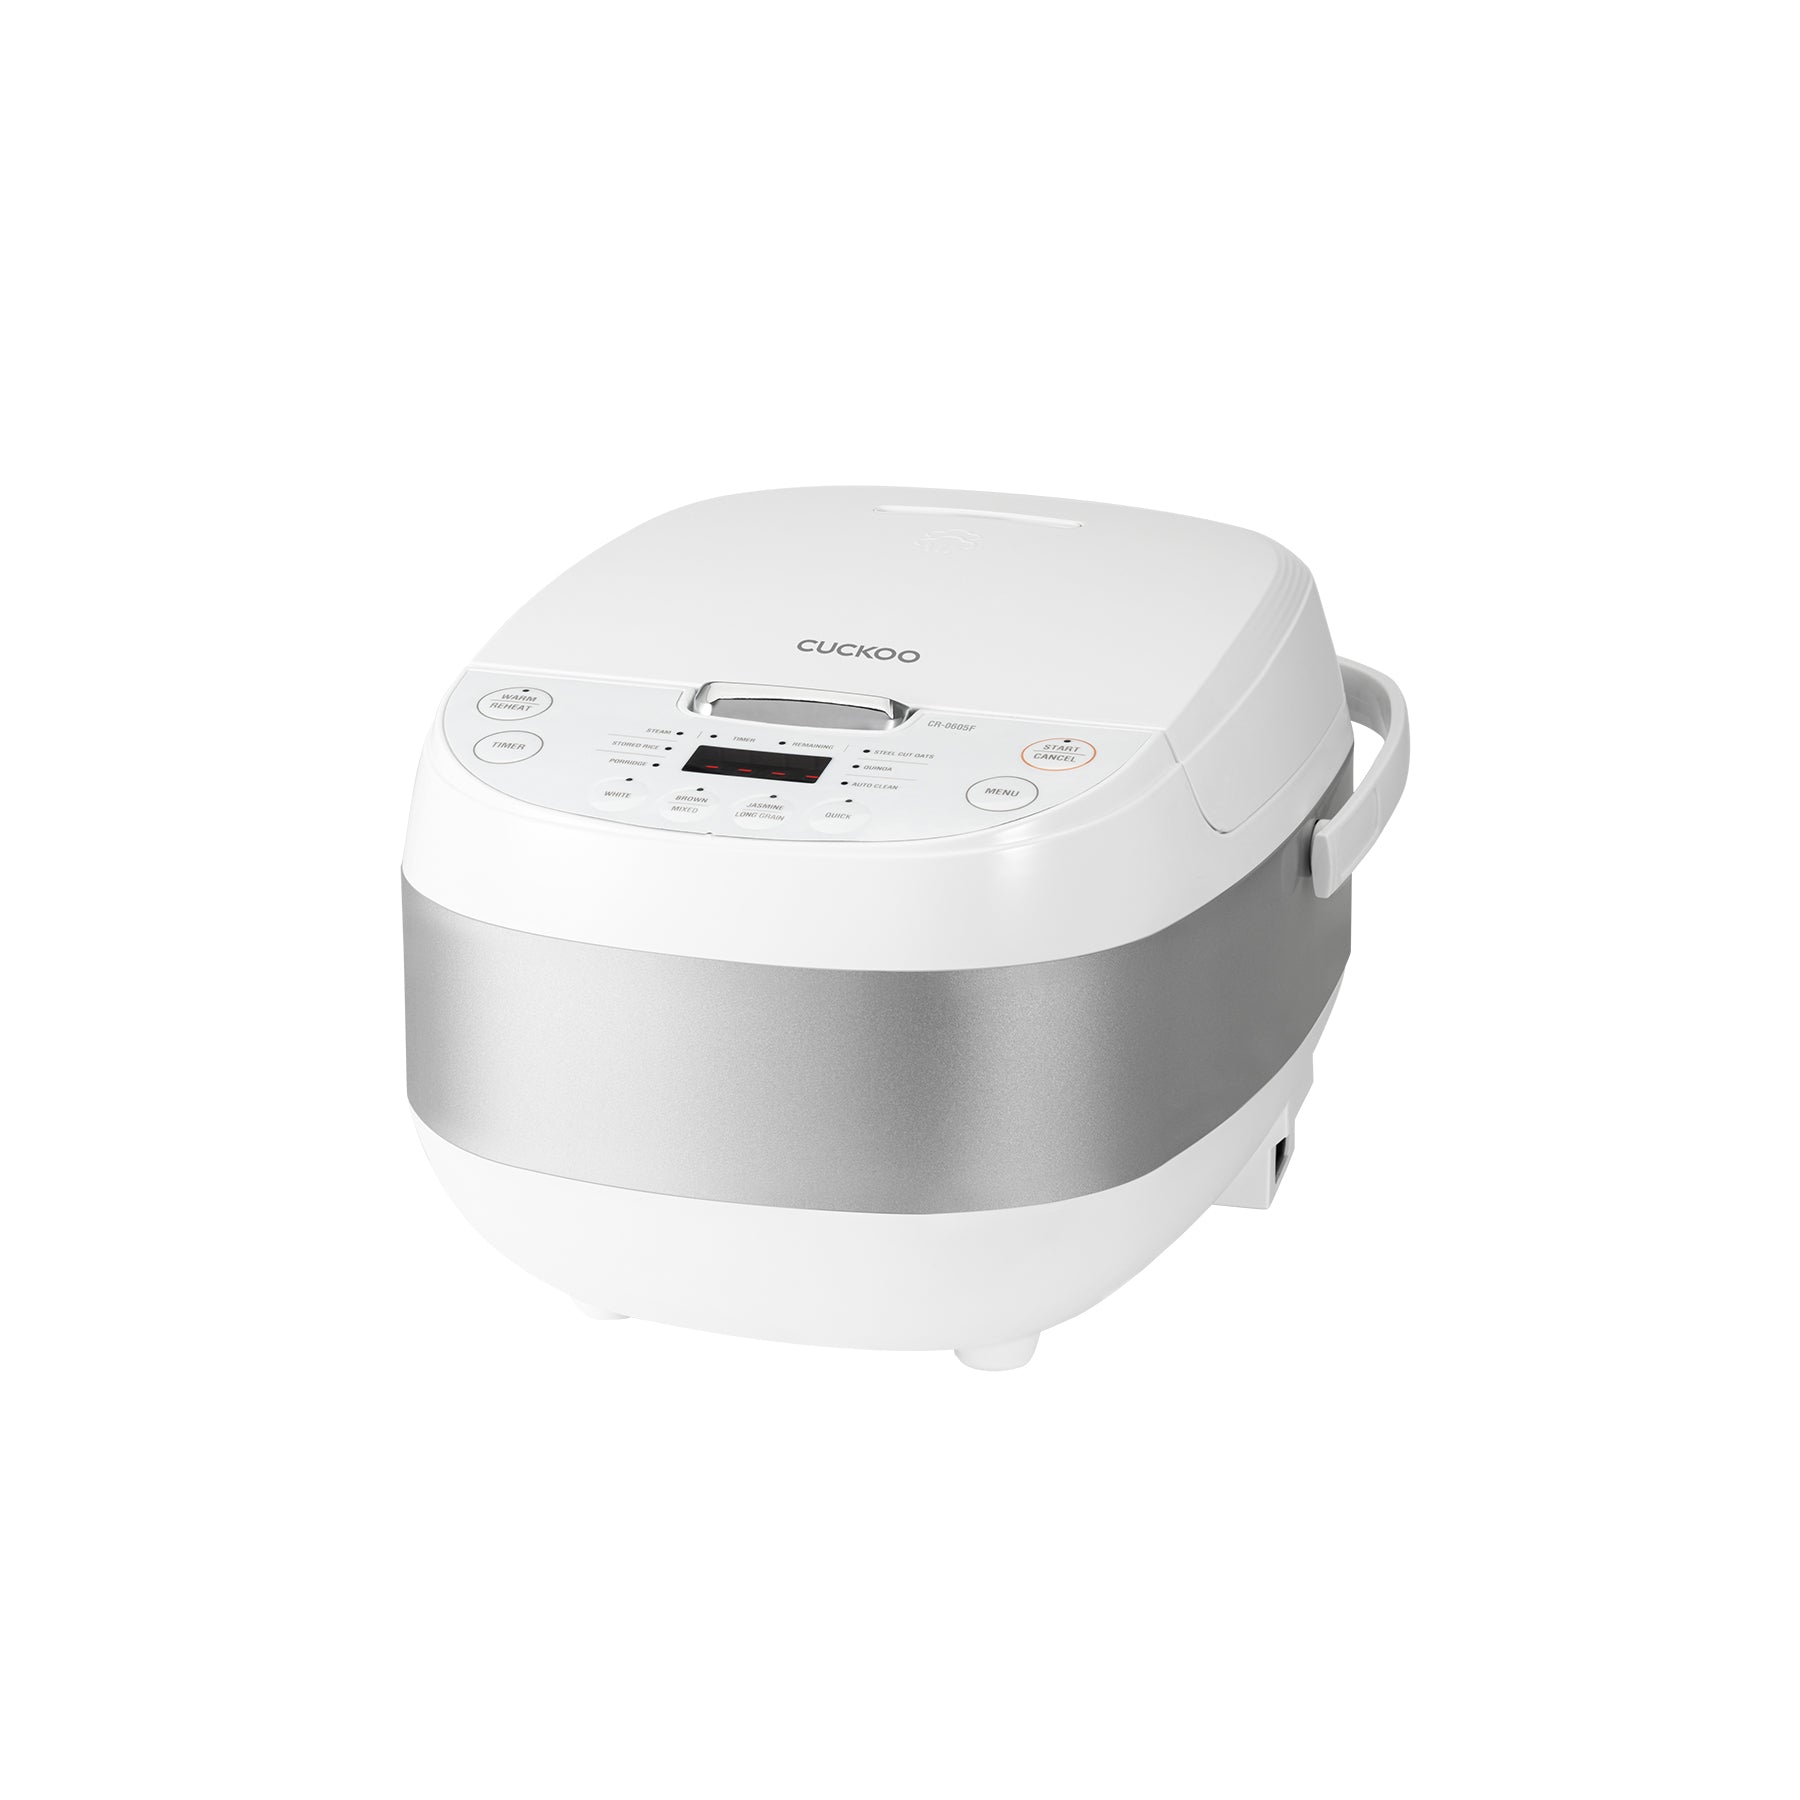 Tefal steam cooker convenient series with rice cooking tool